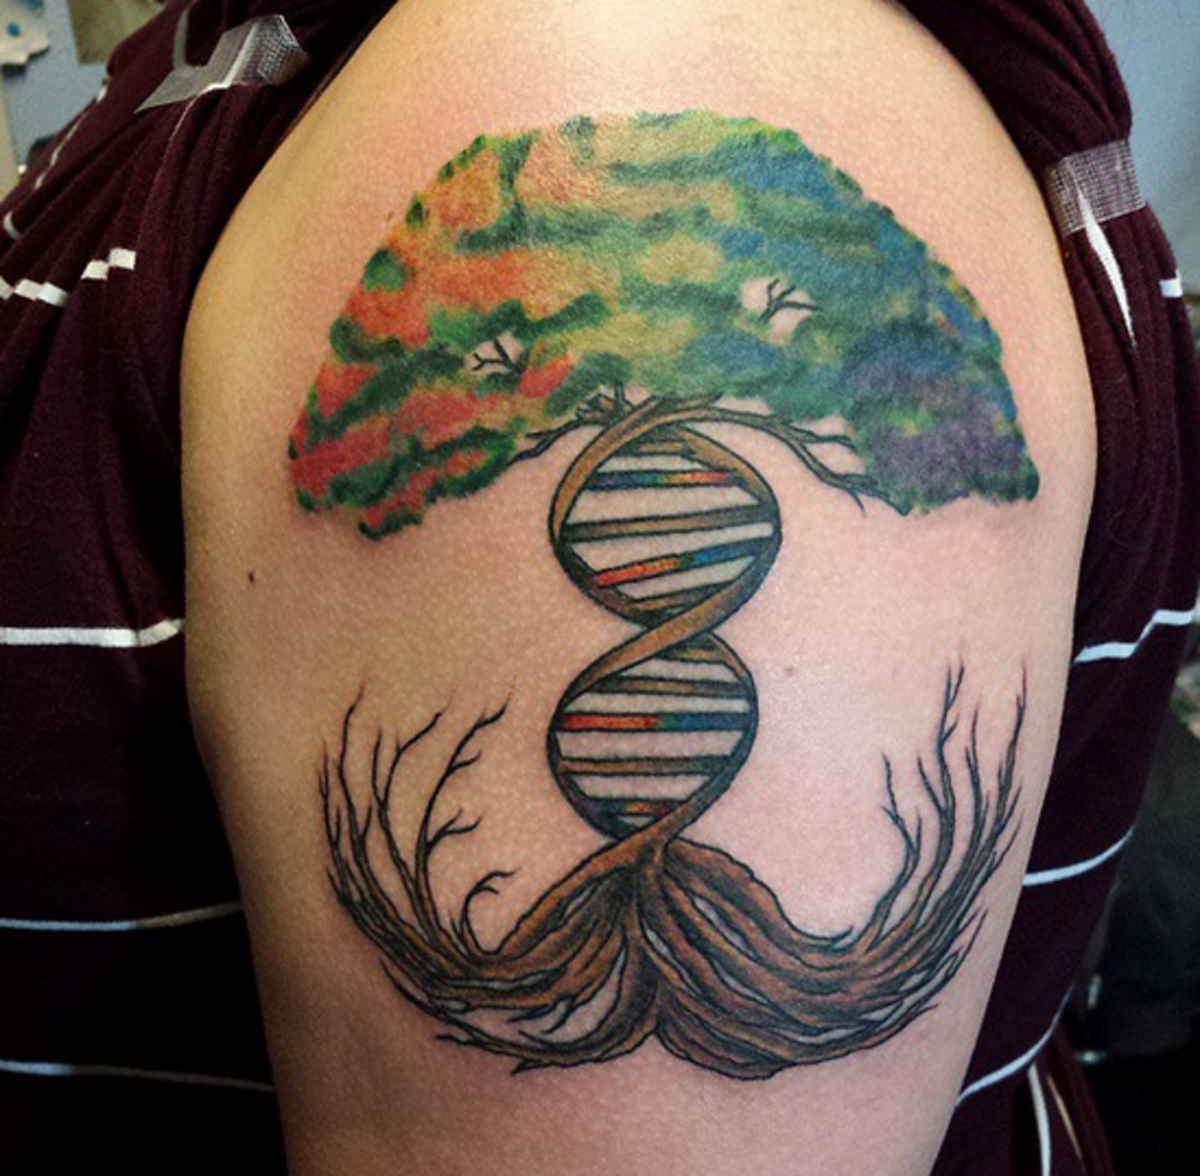 A DNA variation of the roots of a tree tattoo